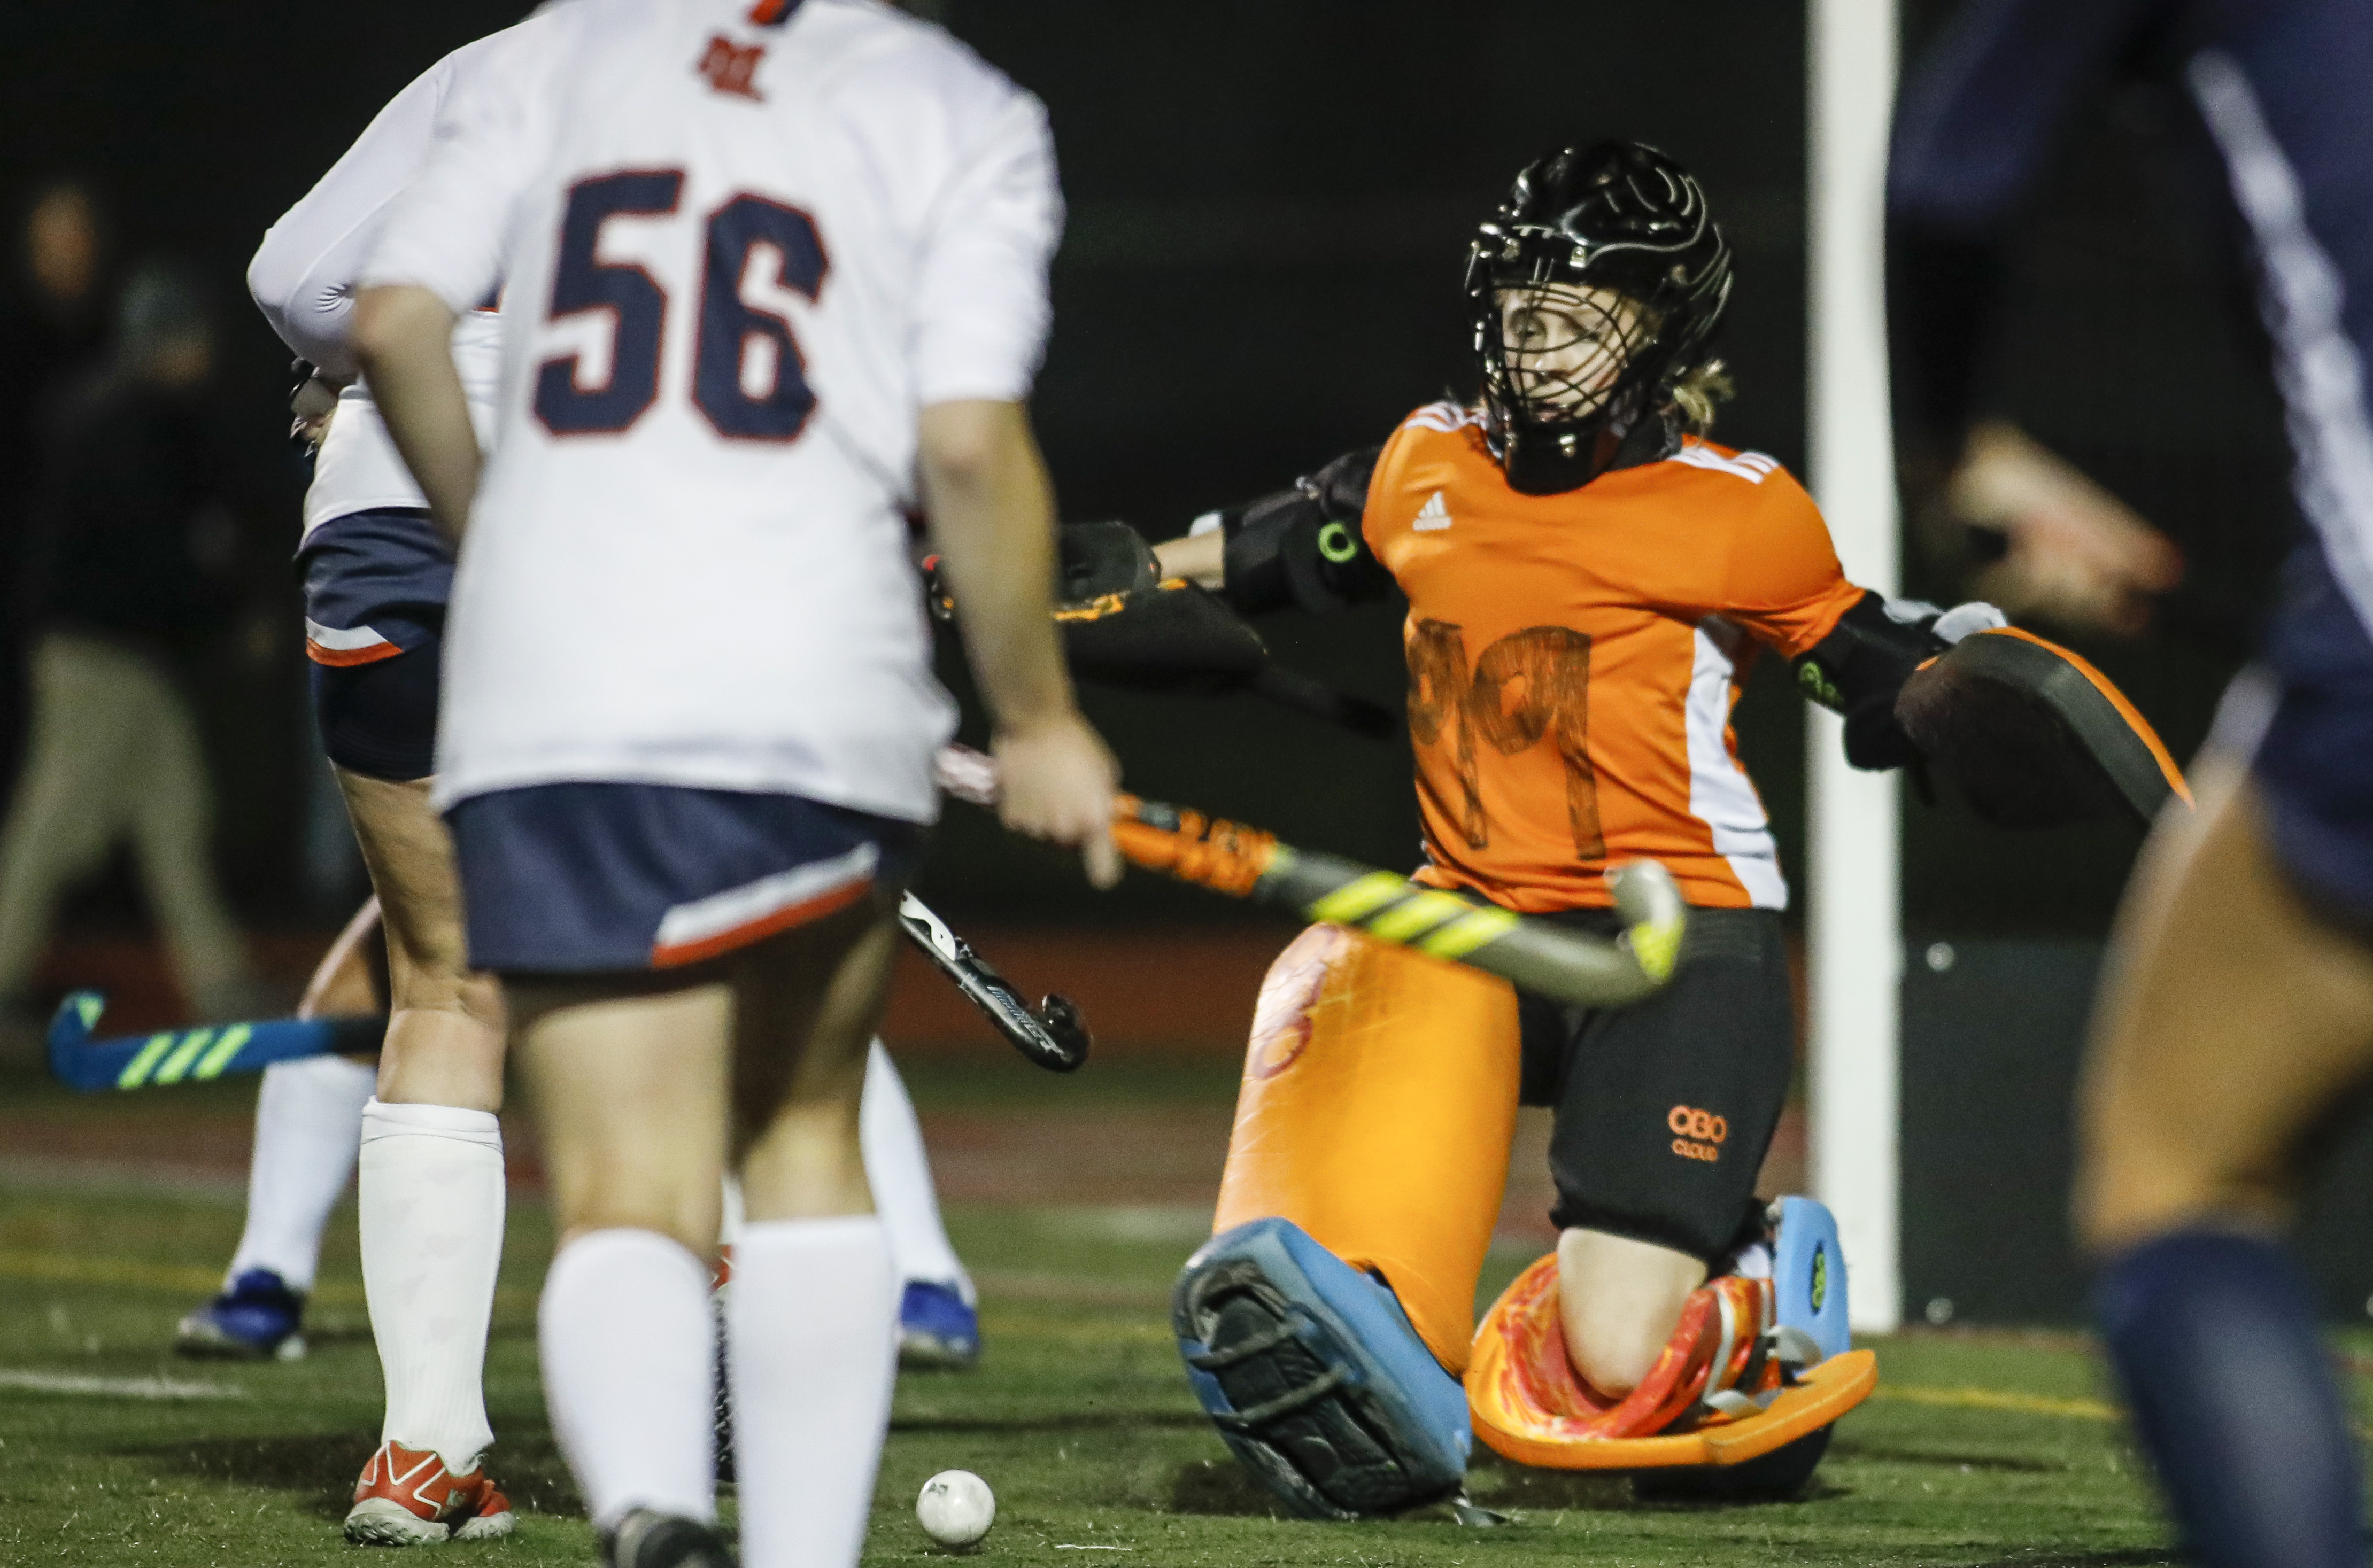 15 questions with… Meghan McGinley, a Penn field hockey sophomore